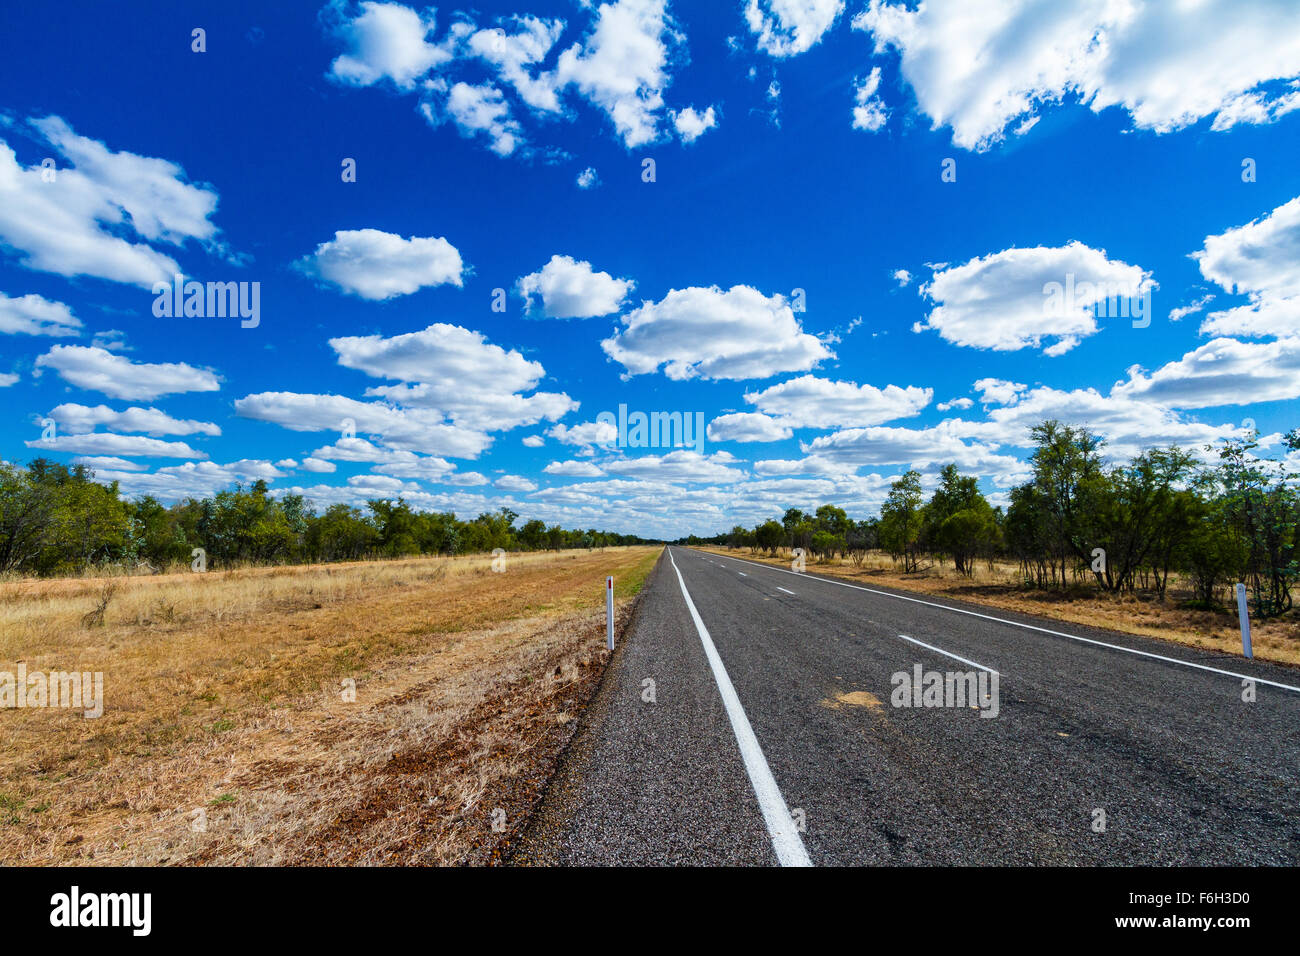 The Savannah Way has some spectacular roads and scenery. This beautiful straight section is in Northern Queensland. Stock Photo